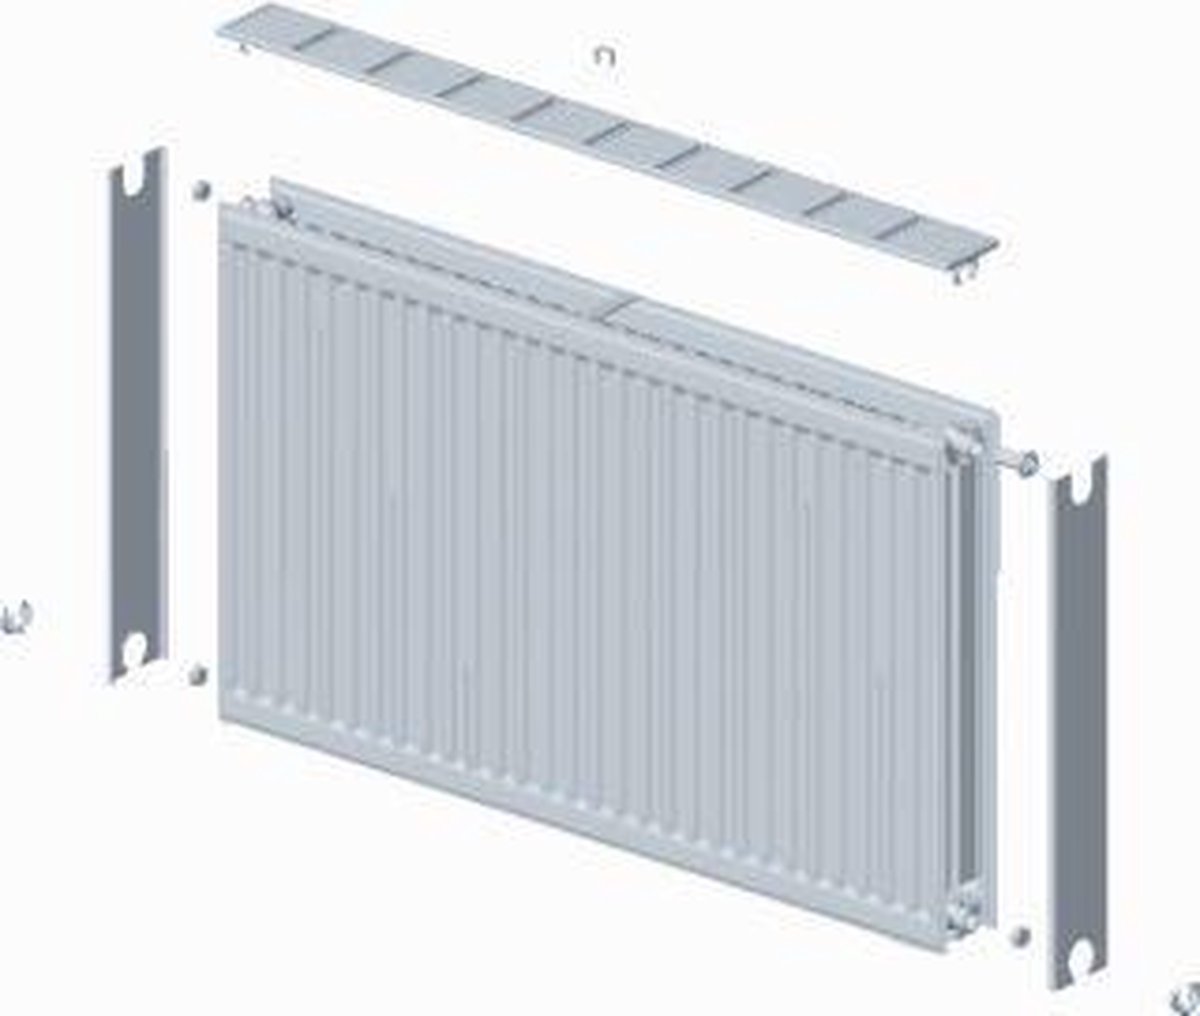 Stelrad paneelradiator Novello, staal, wit, (hxlxd) 600x2200x100mm, 22